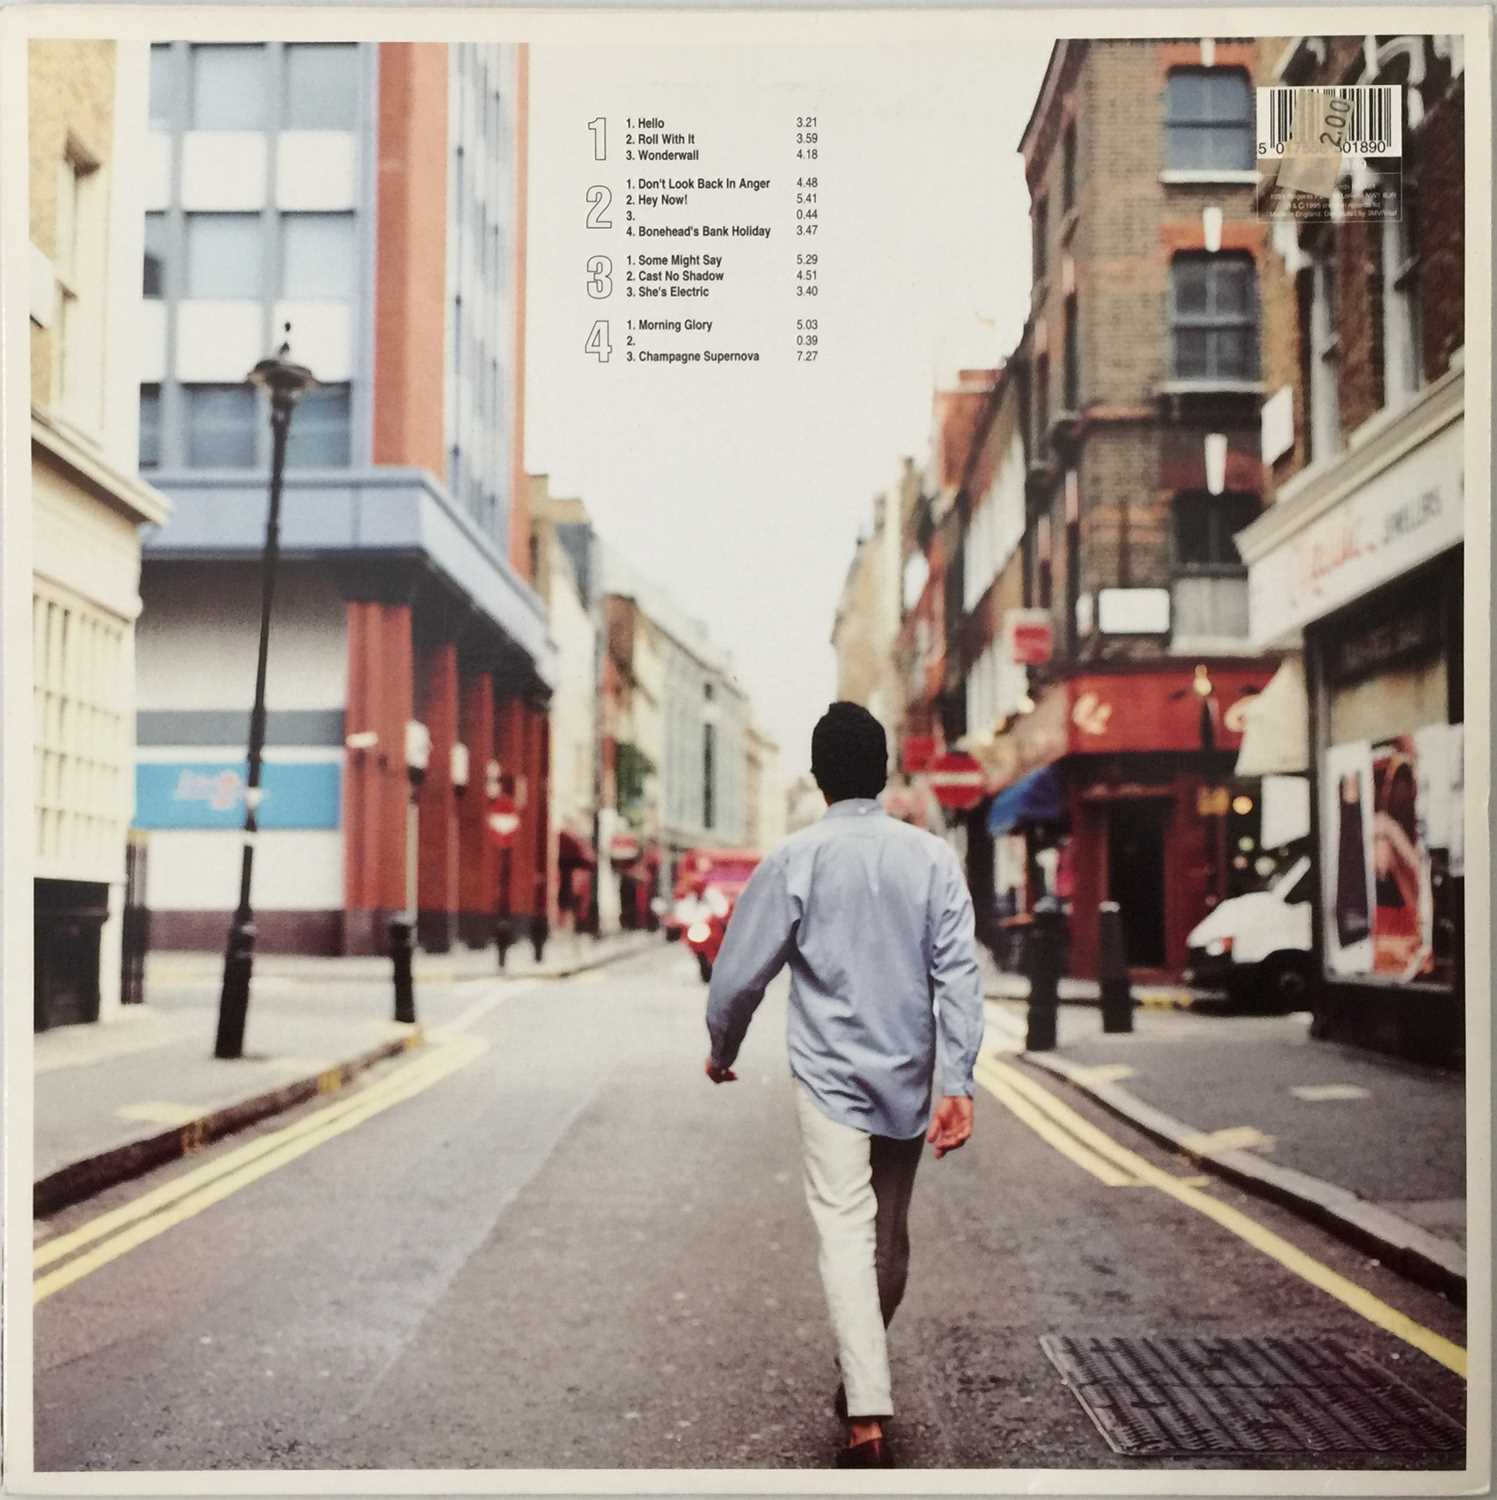 OASIS - (WHAT'S THE STORY) MORNING GLORY? LP (ORIGINAL UK COPY - CREATION CRE LP 189) - Image 3 of 7